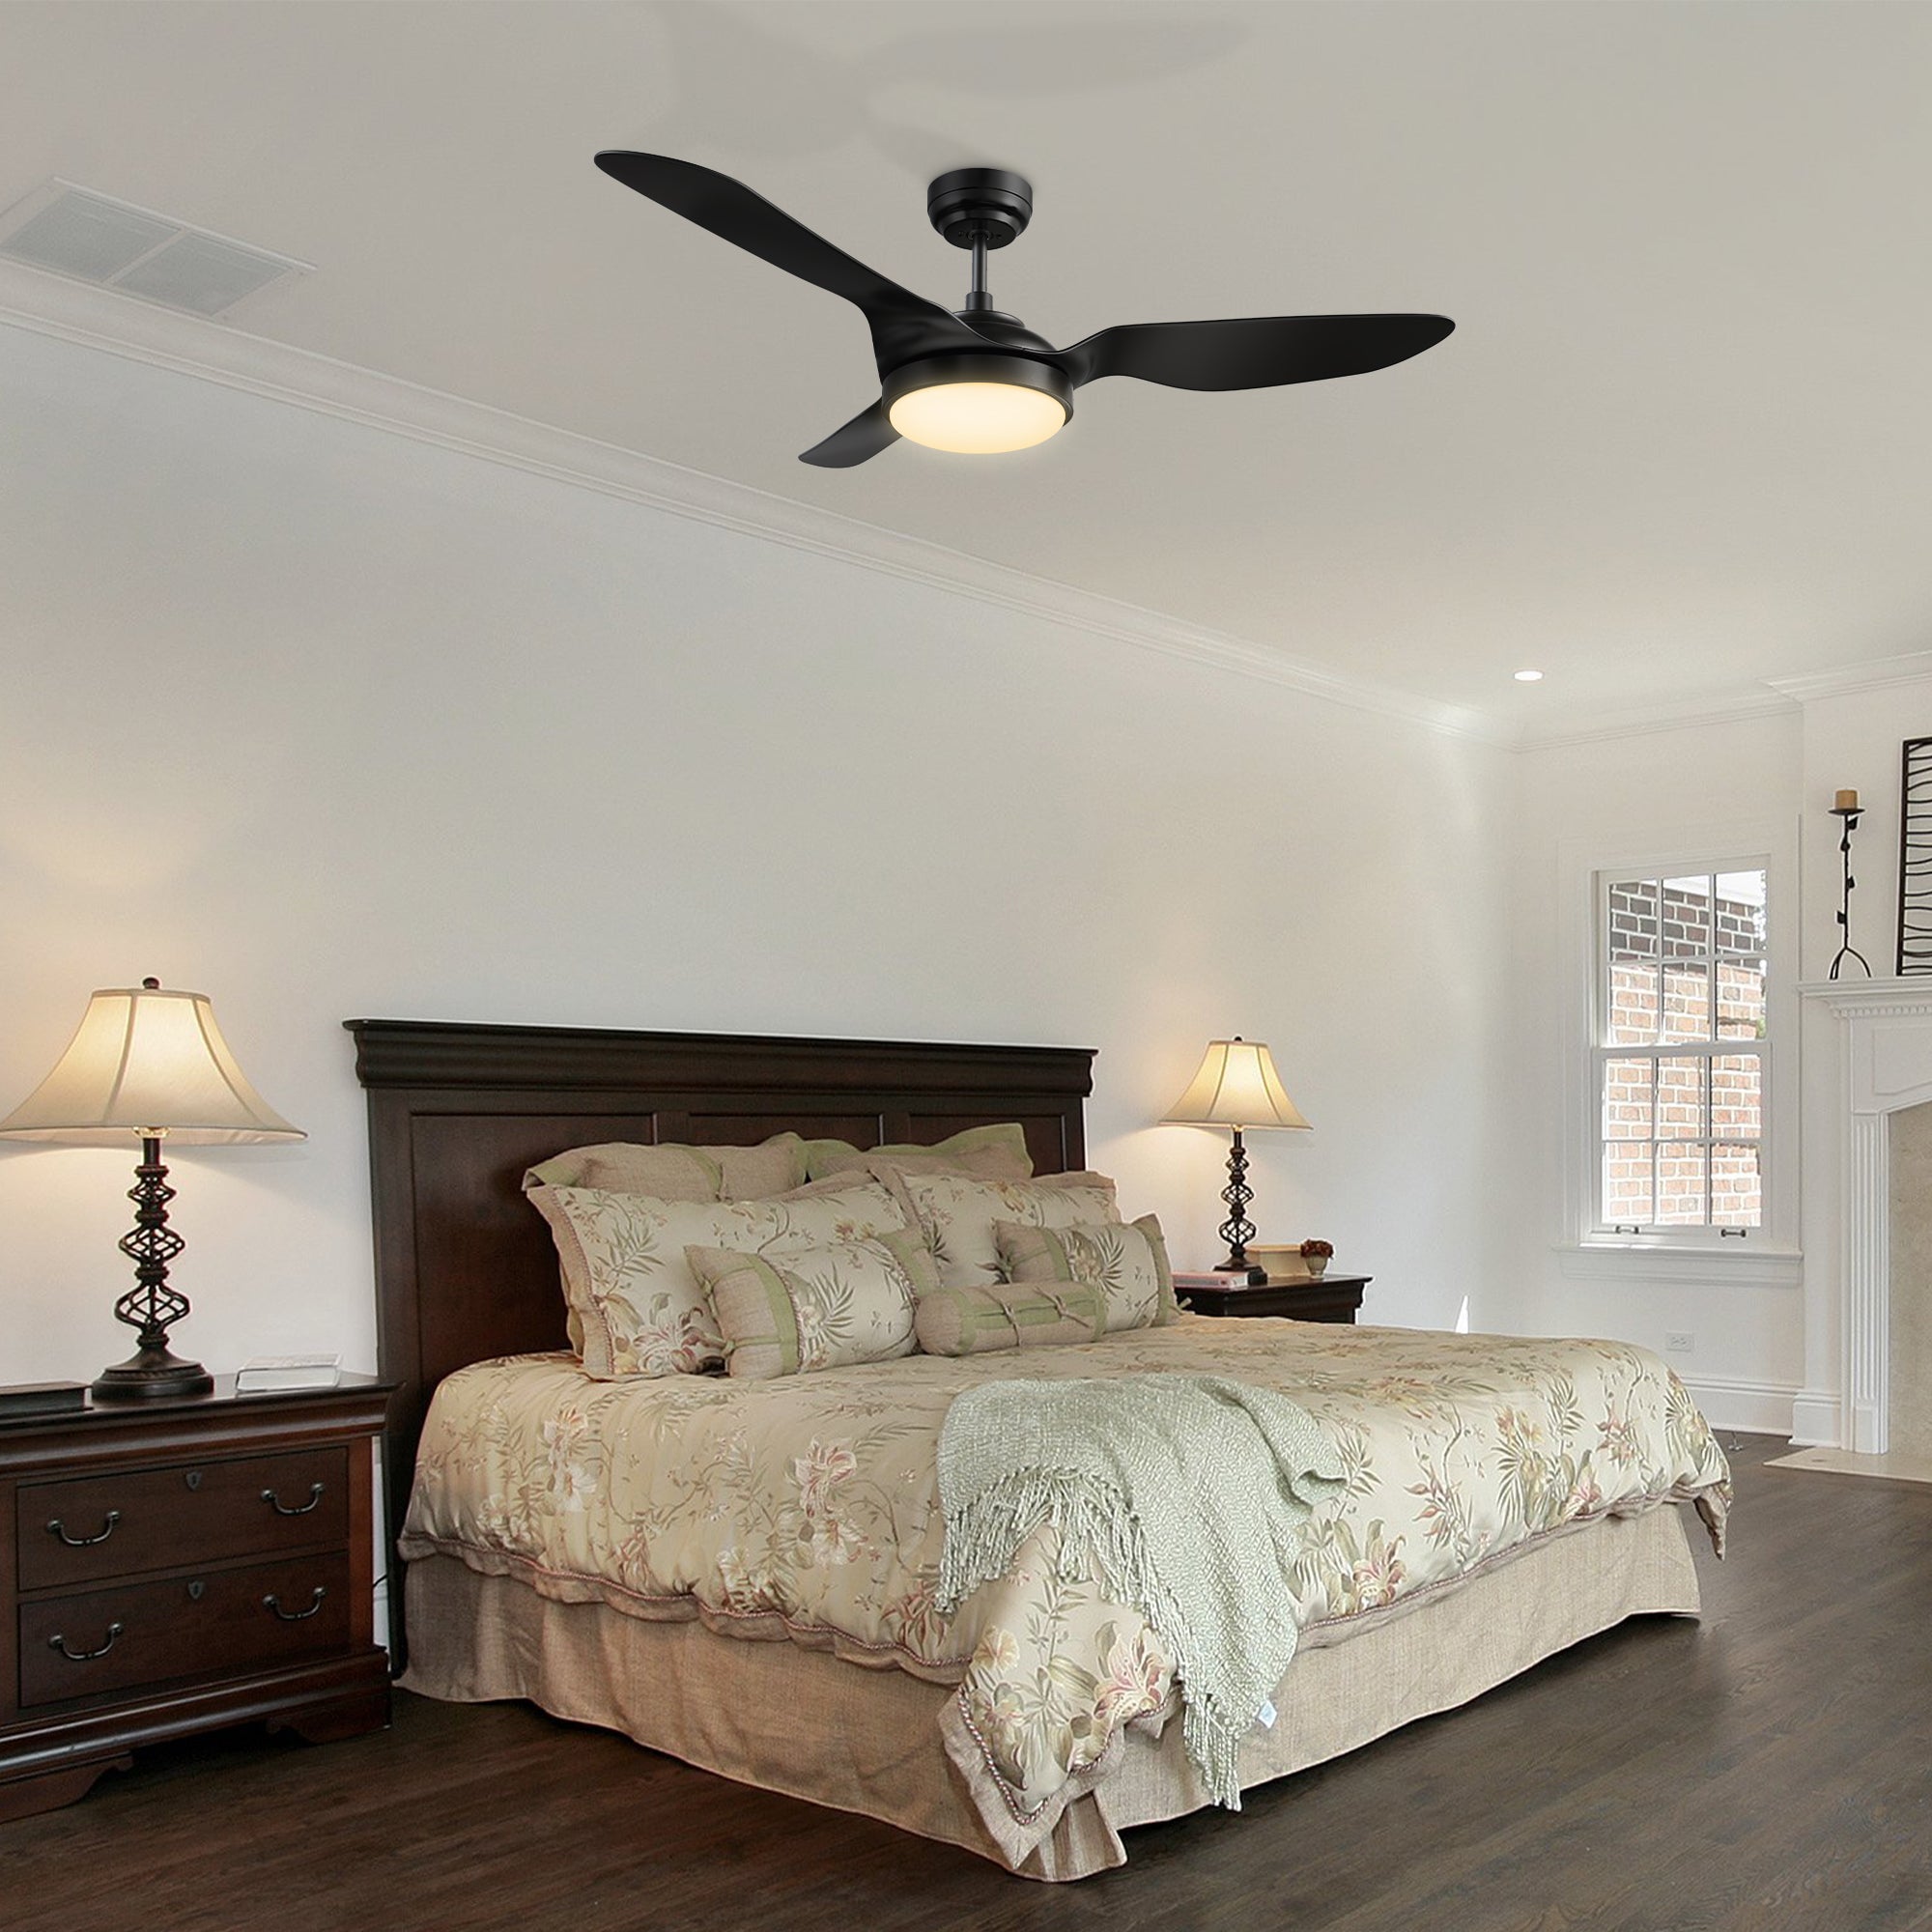 Carro Falkirk 52 inch smart ceiling fan with 3 blades and 4.5 inch downrod, black design, downrod mounted in a modern bedroom. 